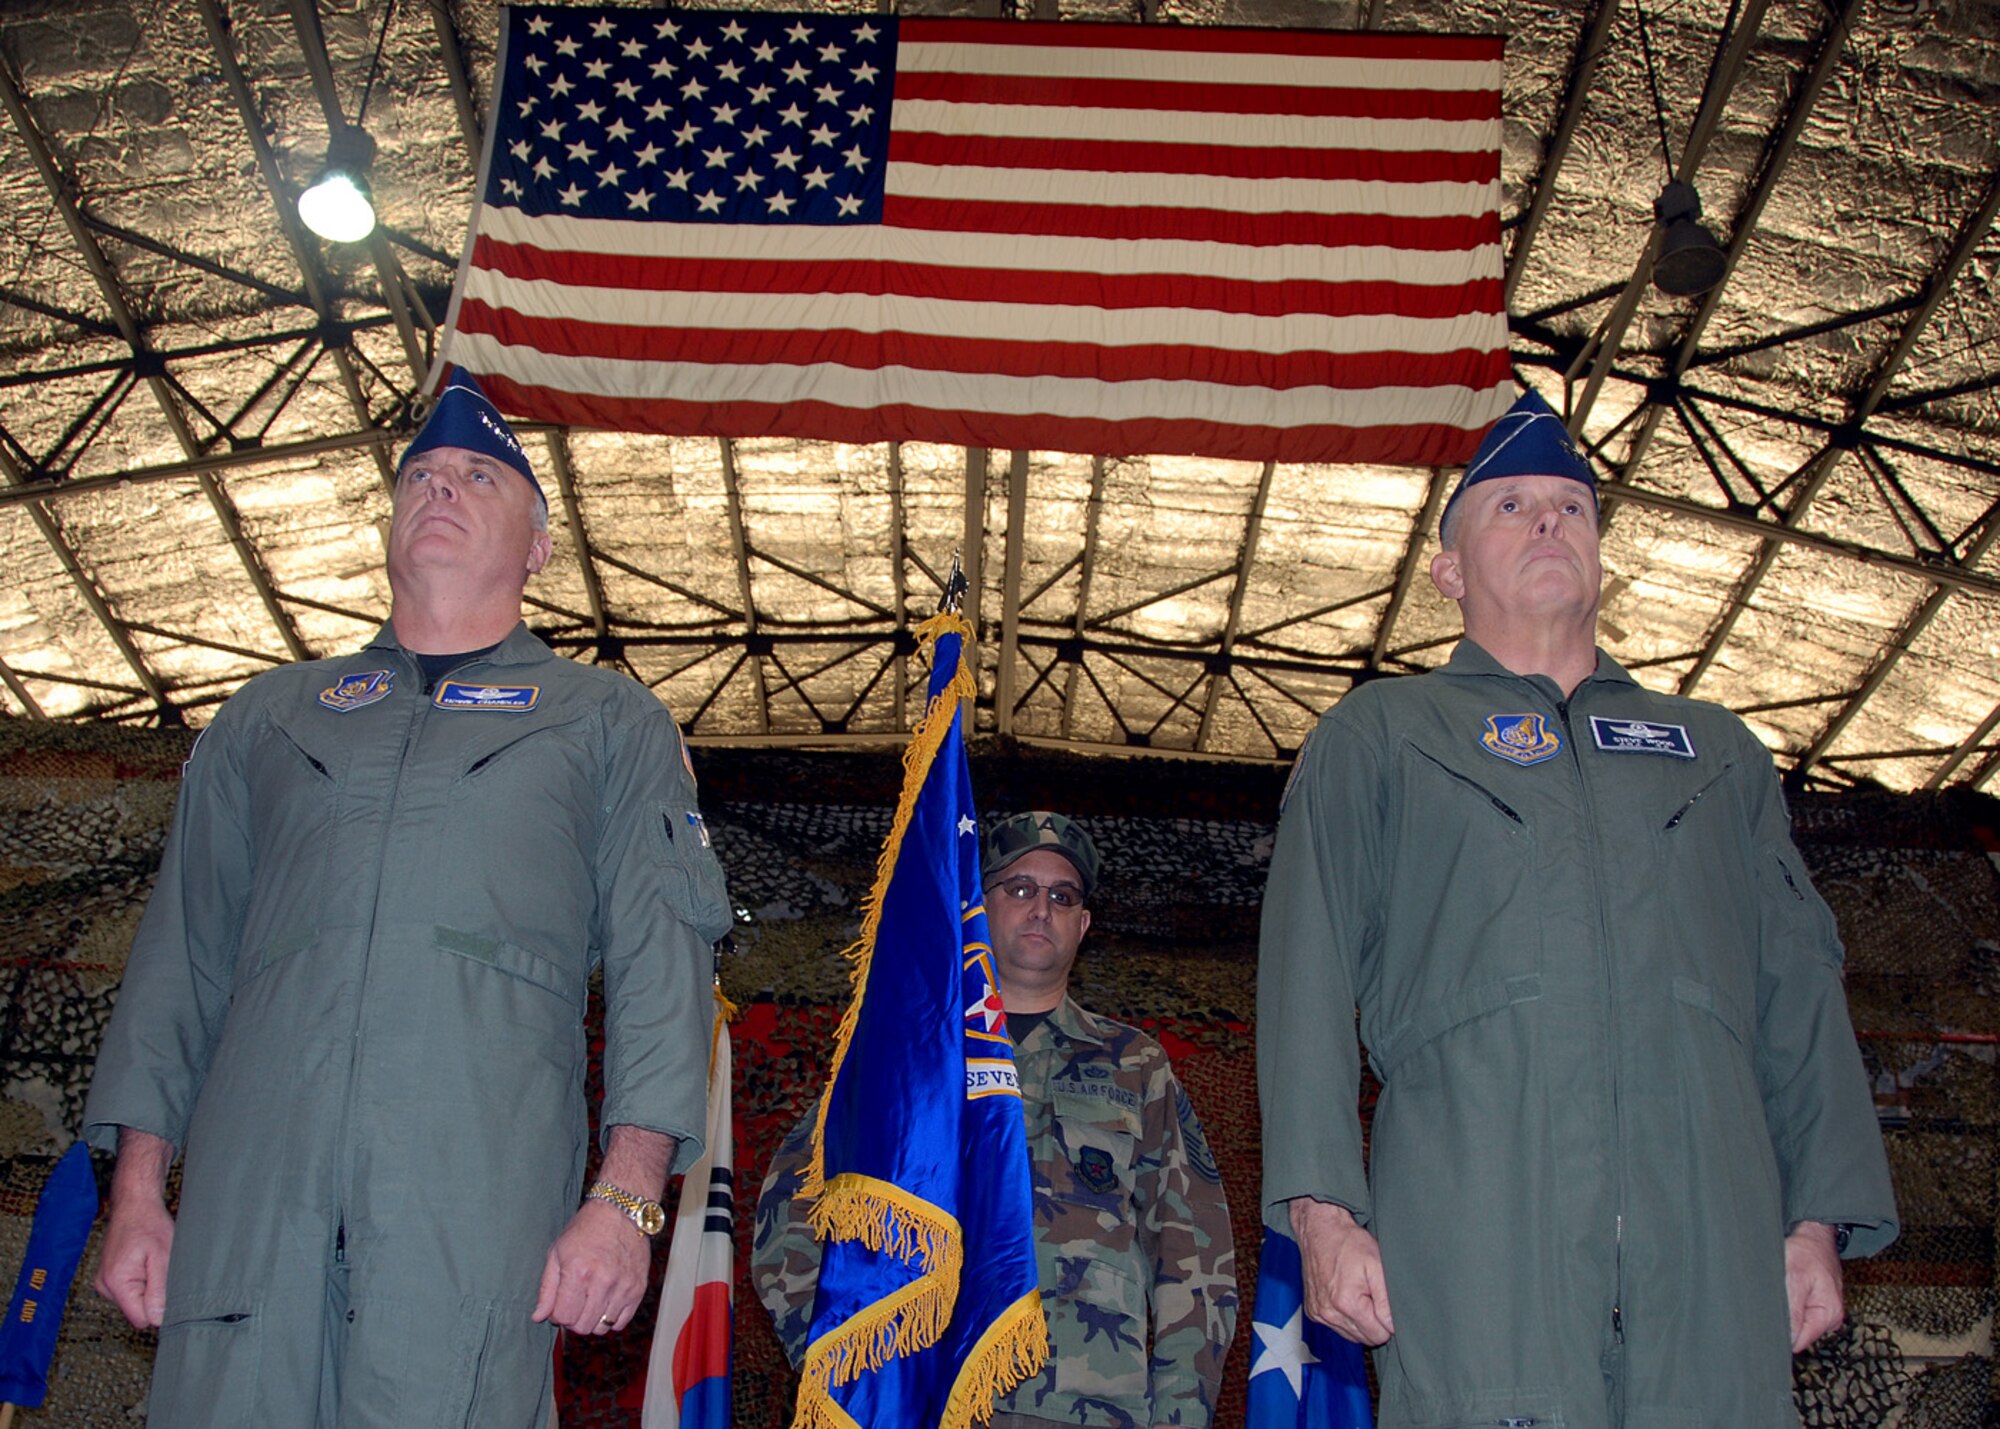 OSAN AIR BASE, Republic of Korea – Gen. Carrol H. “Howie” Chandler, Pacific Air Forces commander, (left) and Lt. Gen. Stephen G. Wood, Seventh Air Force (Air Forces Korea) commander, stand at attention during the Seventh Air Force Re-designation Ceremony Jan. 30. (U.S. Air Force photo/Senior Airman Chad Strohmeyer)